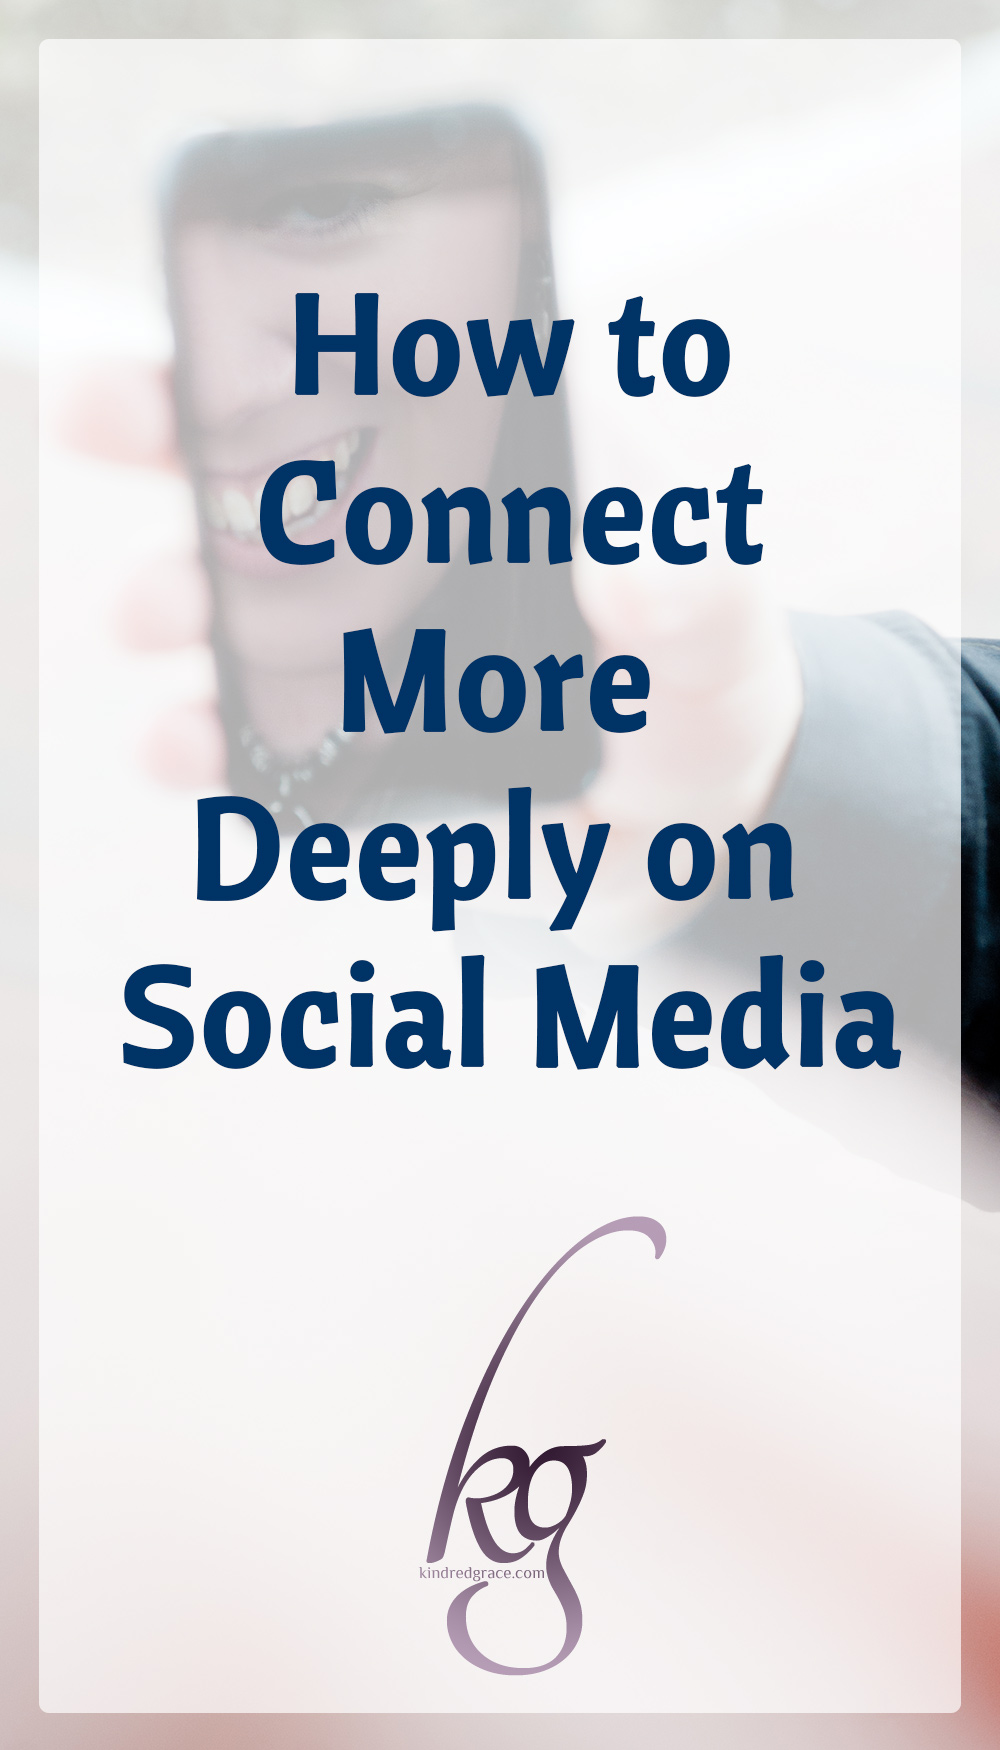 While our internet connections are getting stronger and faster, our relationships with others are getting crowded out by the crackling noise of information overload due to all the sharing options at our fingertips.

We may be sharing facts with our numerous friends these days, but we are not connecting with them. via @KindredGrace